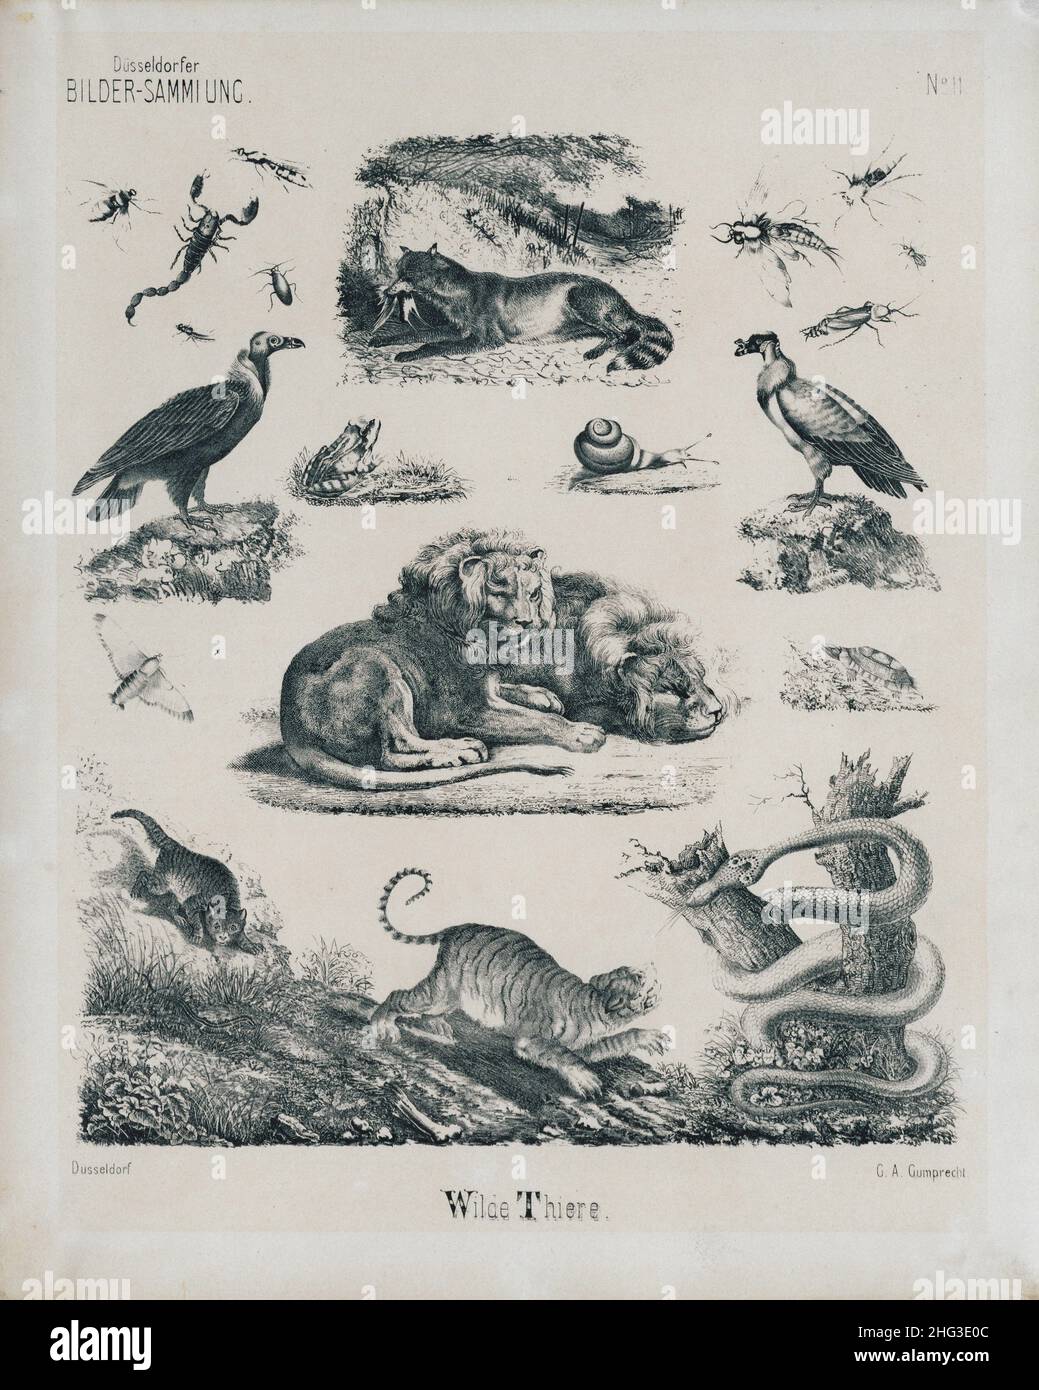 The 19th century vintage illustration of wild animals, insects and birds. 1860 Lithograph of snail; frog; scorpion; lions; vulture; snake; tiger, turt Stock Photo